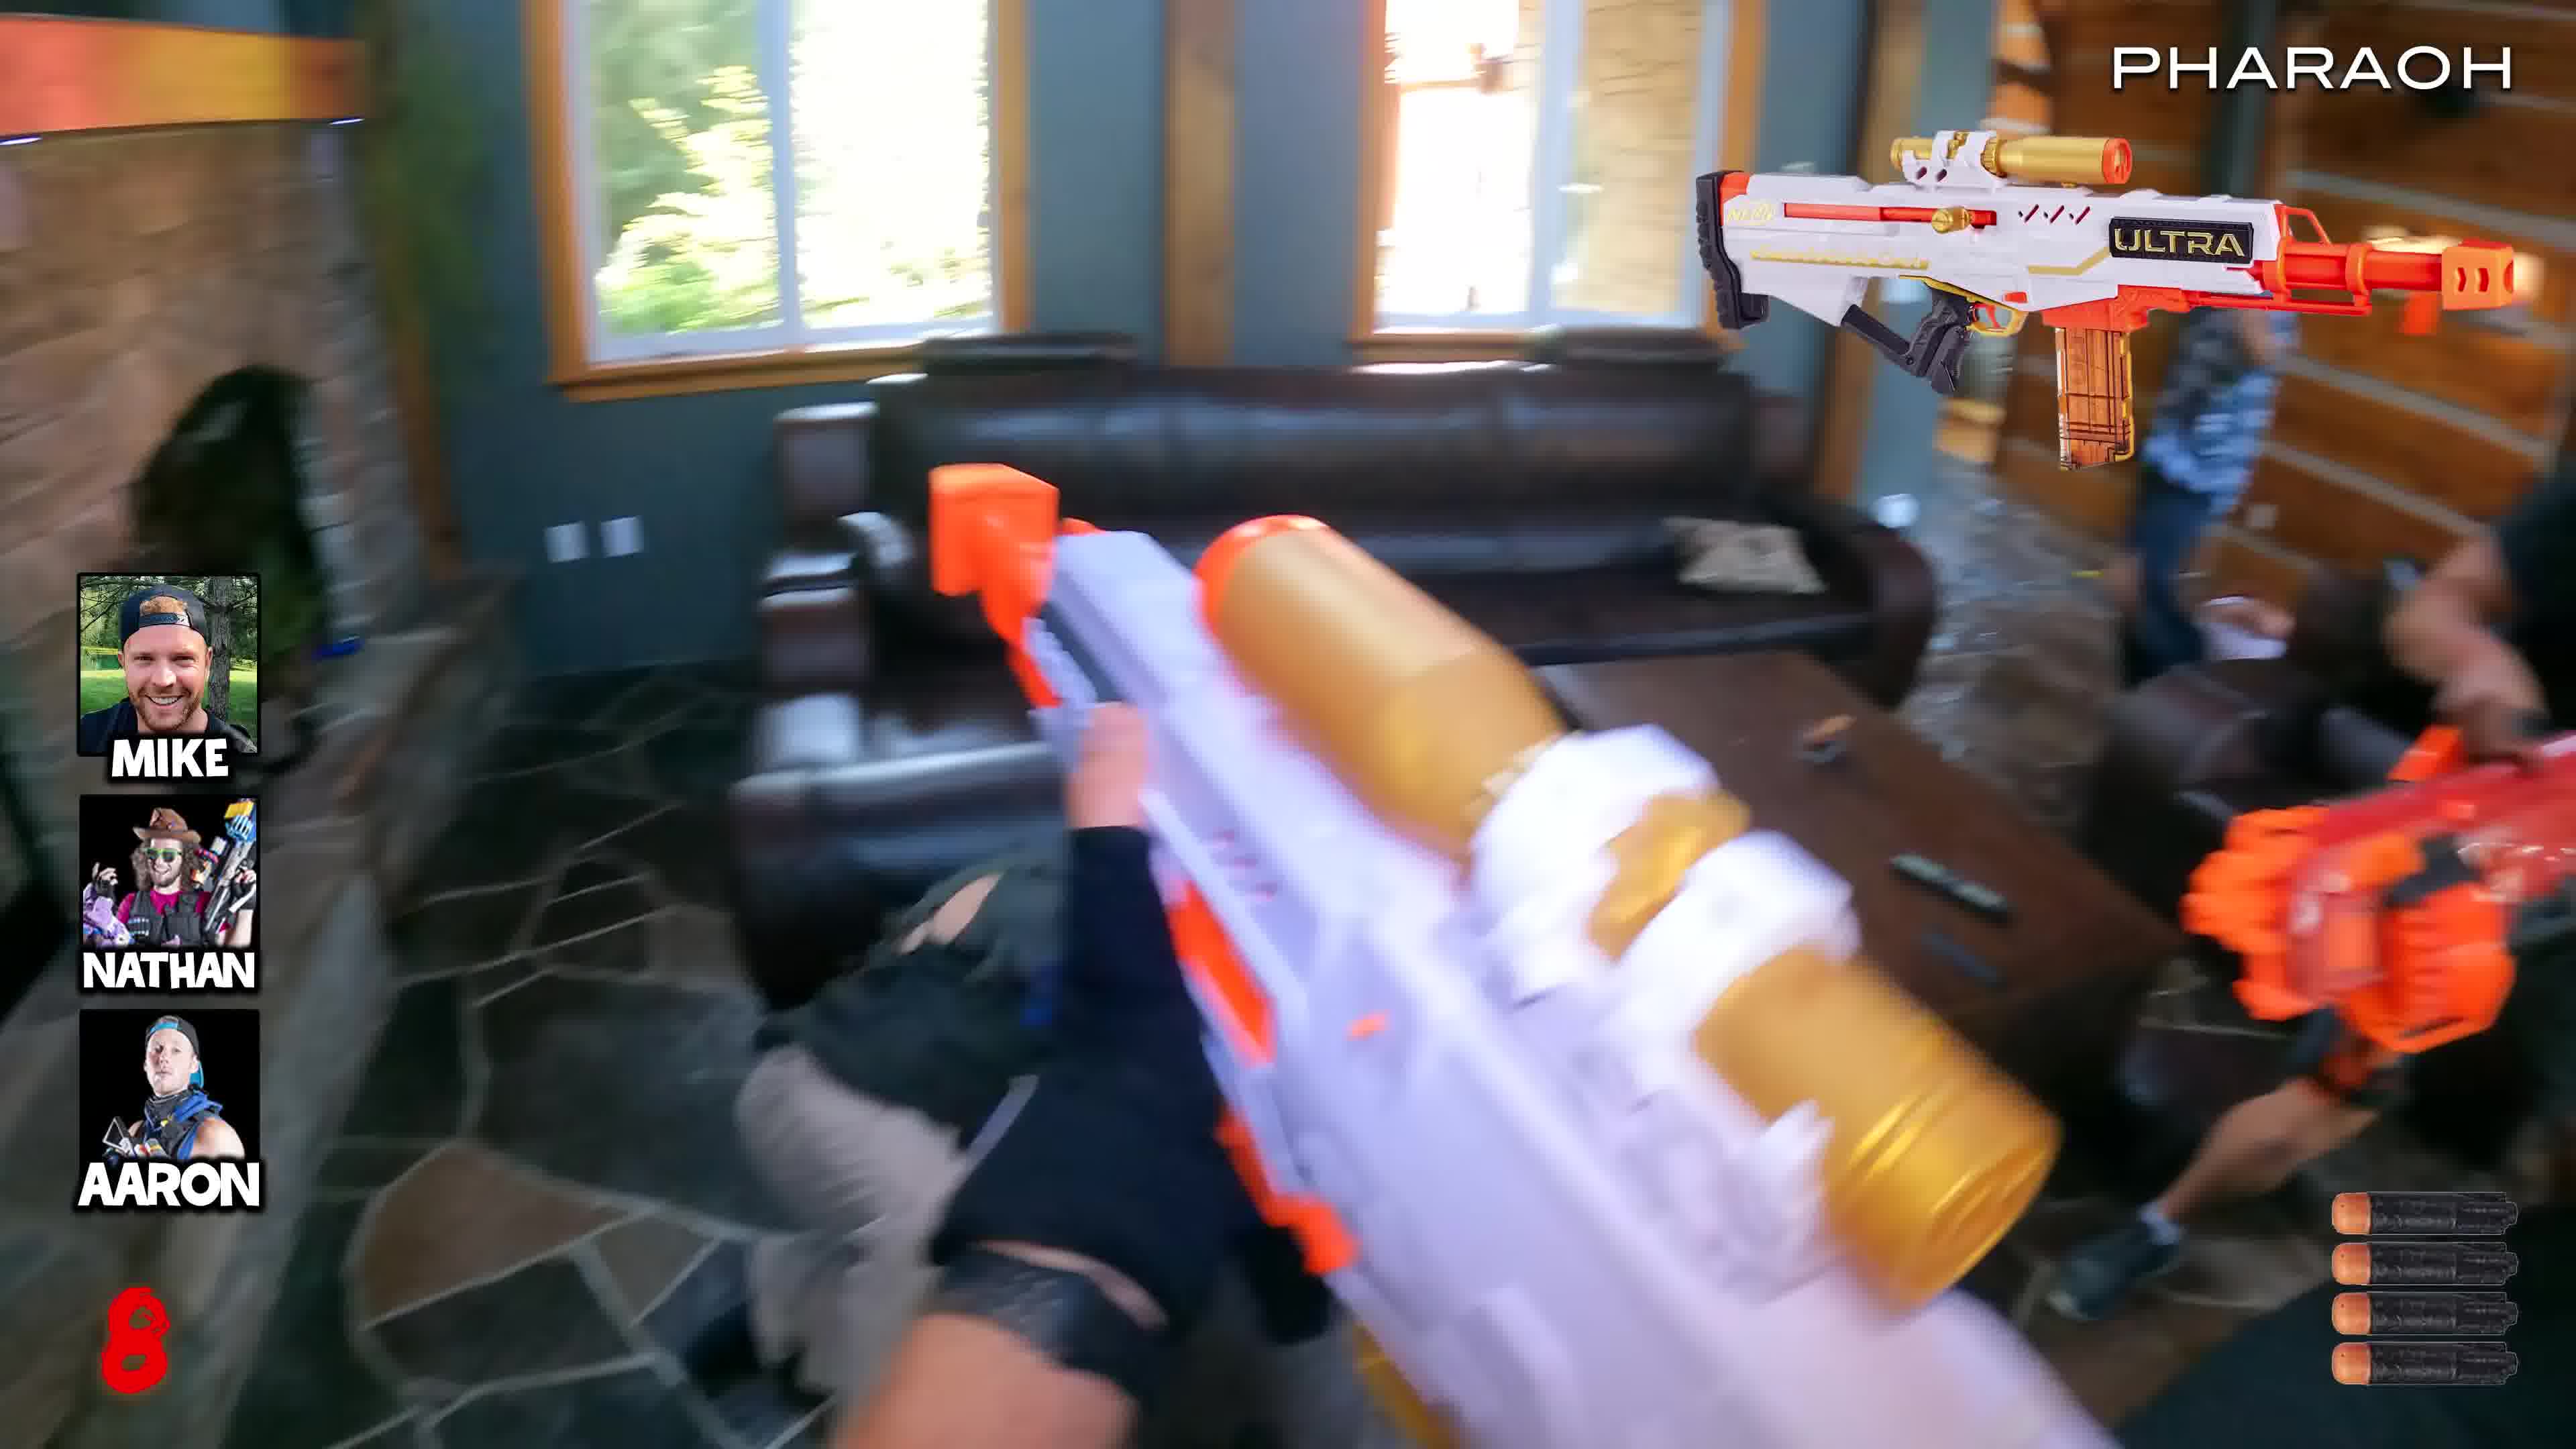 NERF】NERF meets Call of Duty ZOMBIES 43 Gun First Person Shooter-哔哩哔哩